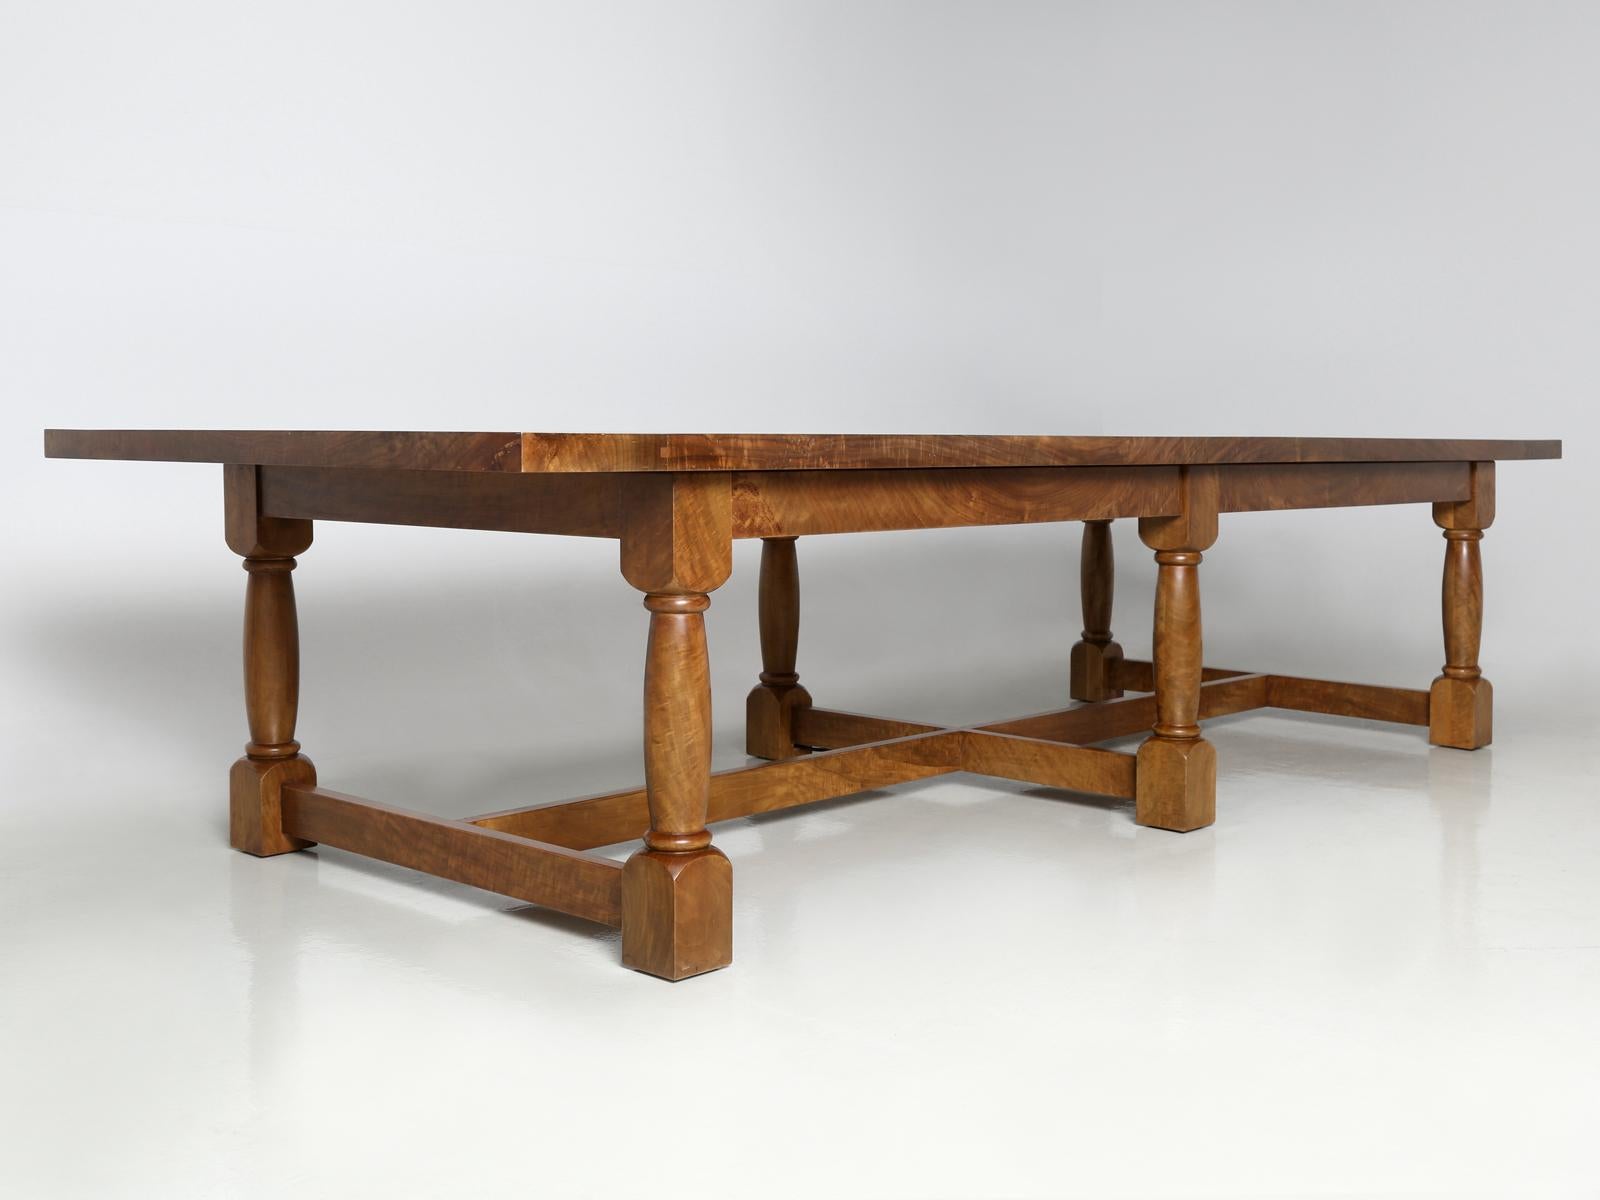 North American American Made Figured Walnut Desk Available Numerous Dimensions & Configurations For Sale